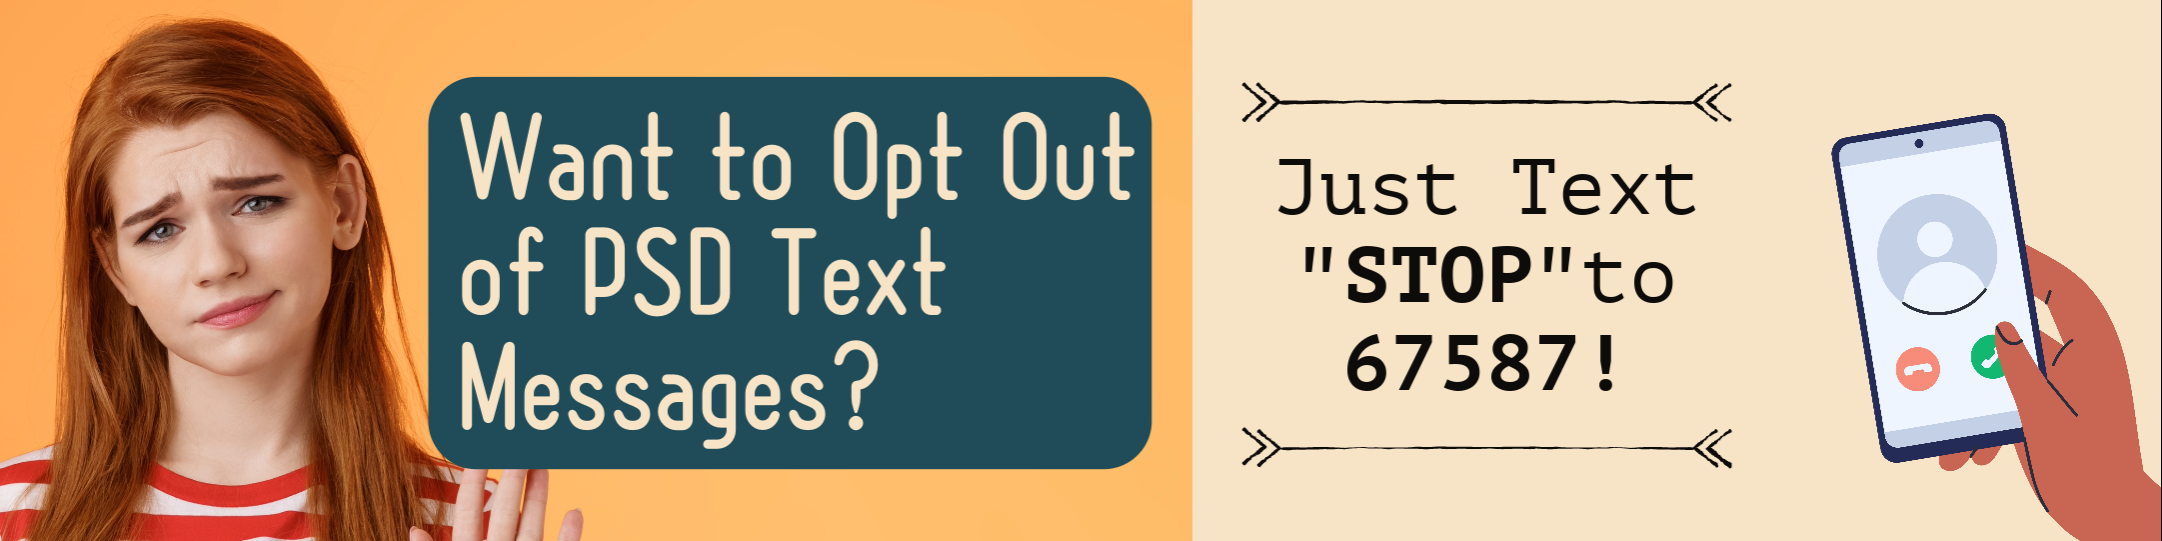 Opt out of text messaging by replying "STOP" to 67587